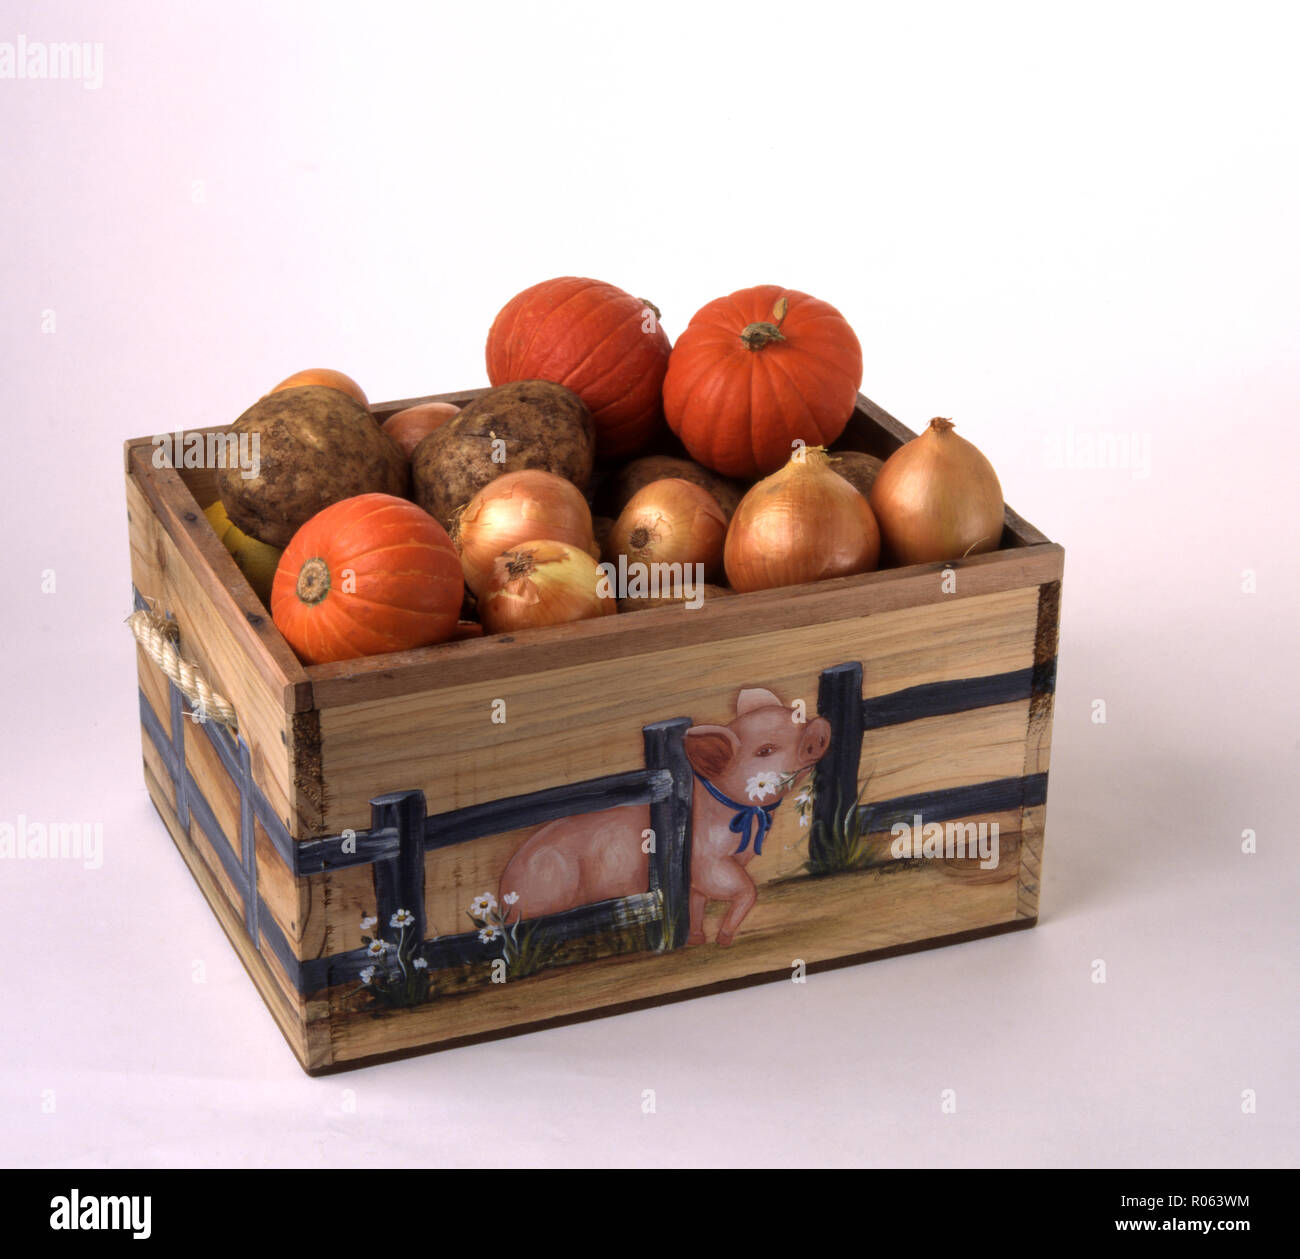 Hand painted decorated with pink pig wooden vegetable box containing harvested pumpkins, onions and potatoes Stock Photo